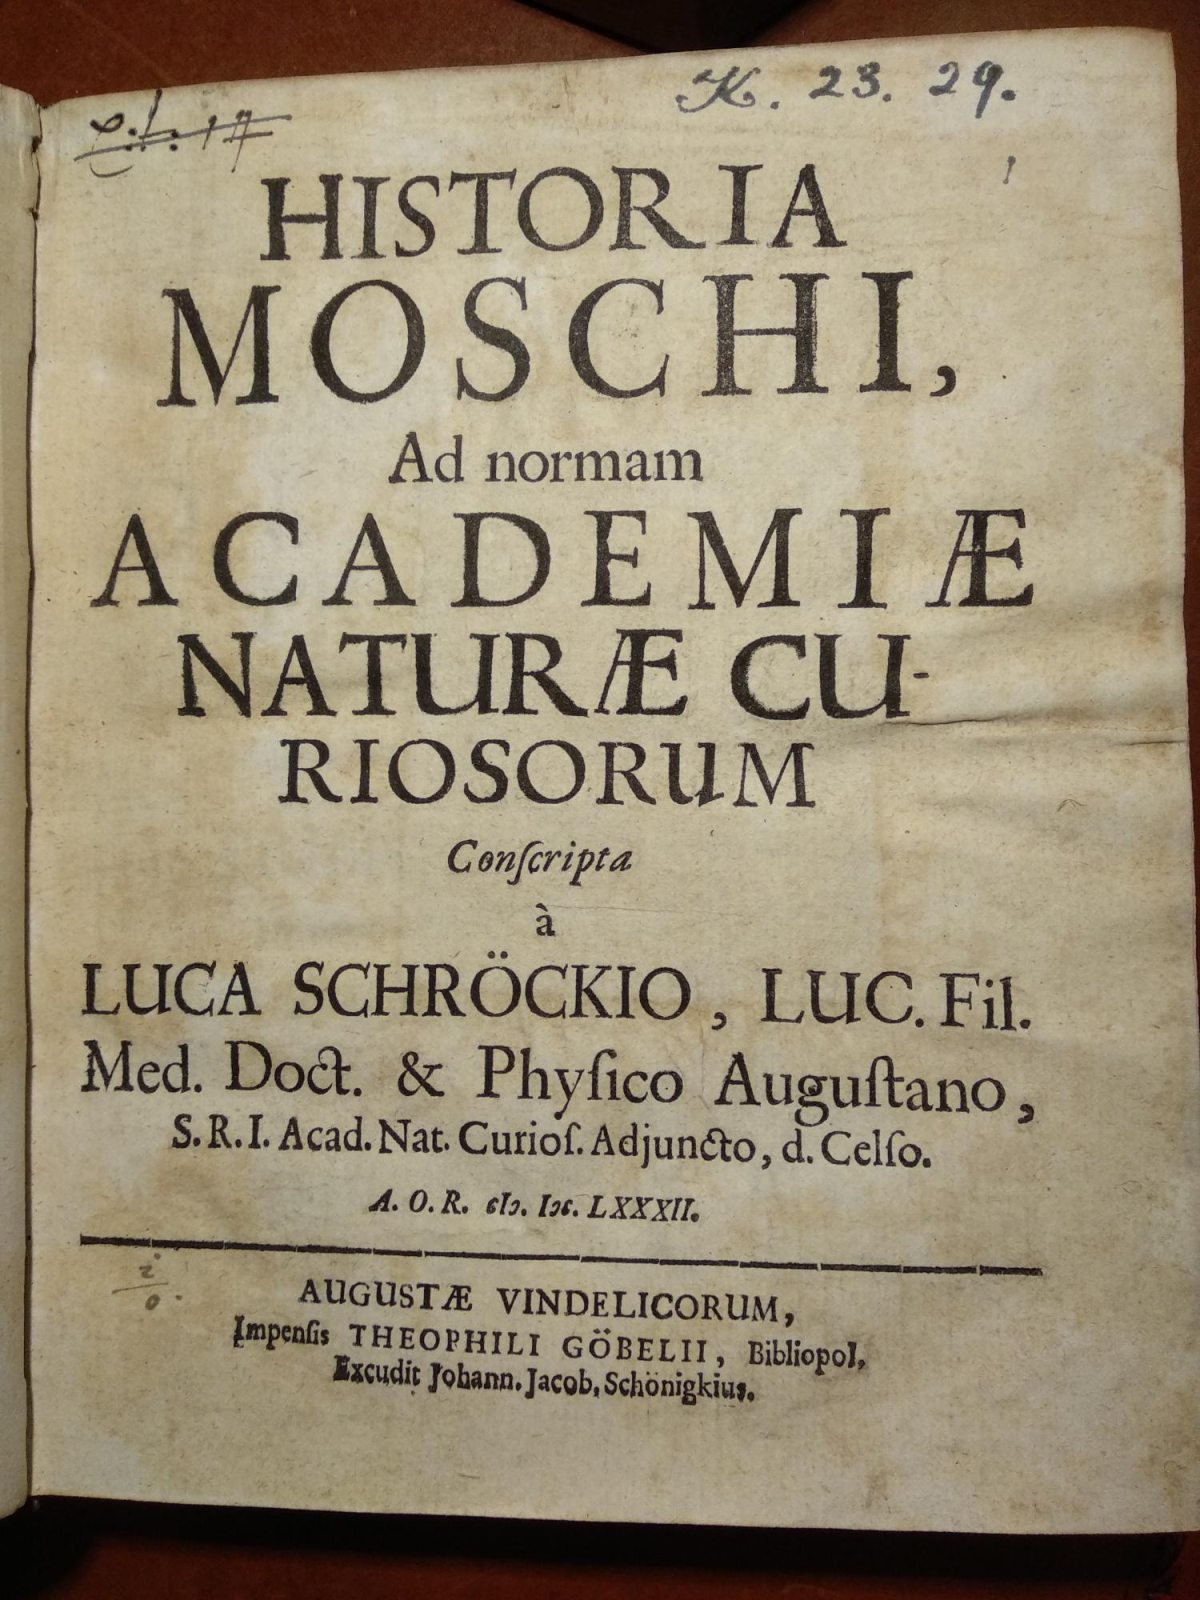 A title page for Historia Moschi